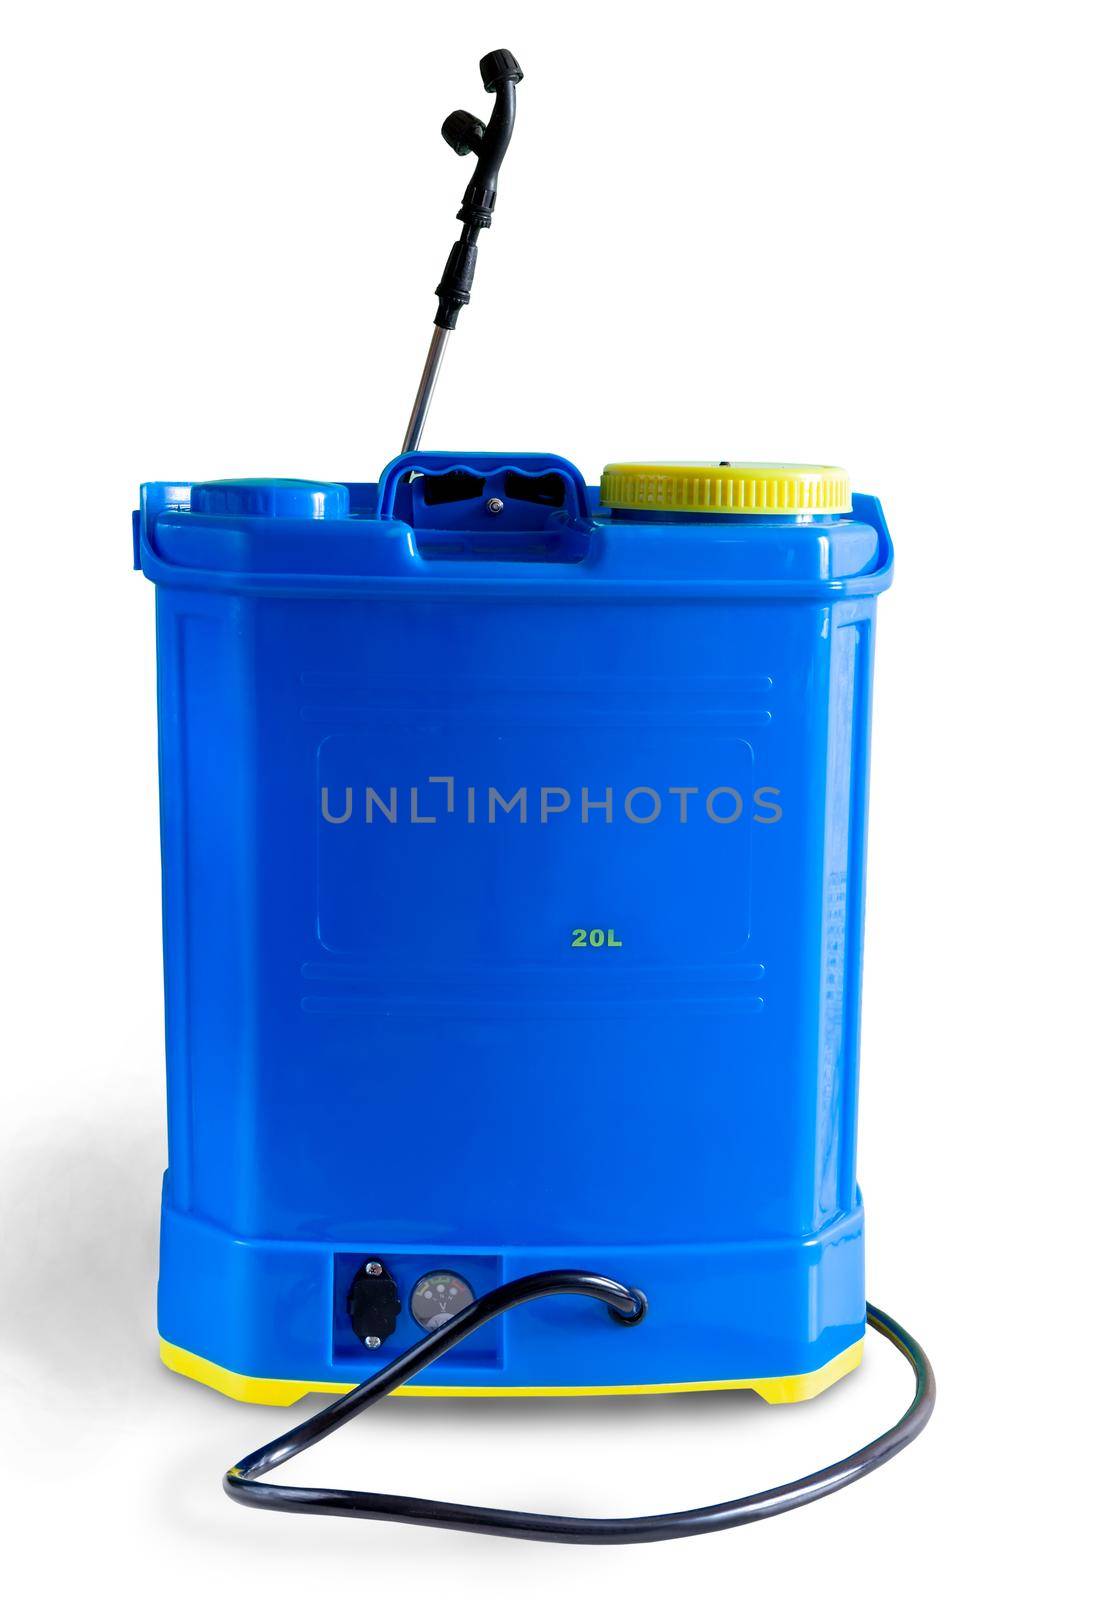 Backpack battery sprayer for protecting trees and plants from diseases and pests. The pressure is increased by a battery-operated pump. Front view. Isolated on a white background.